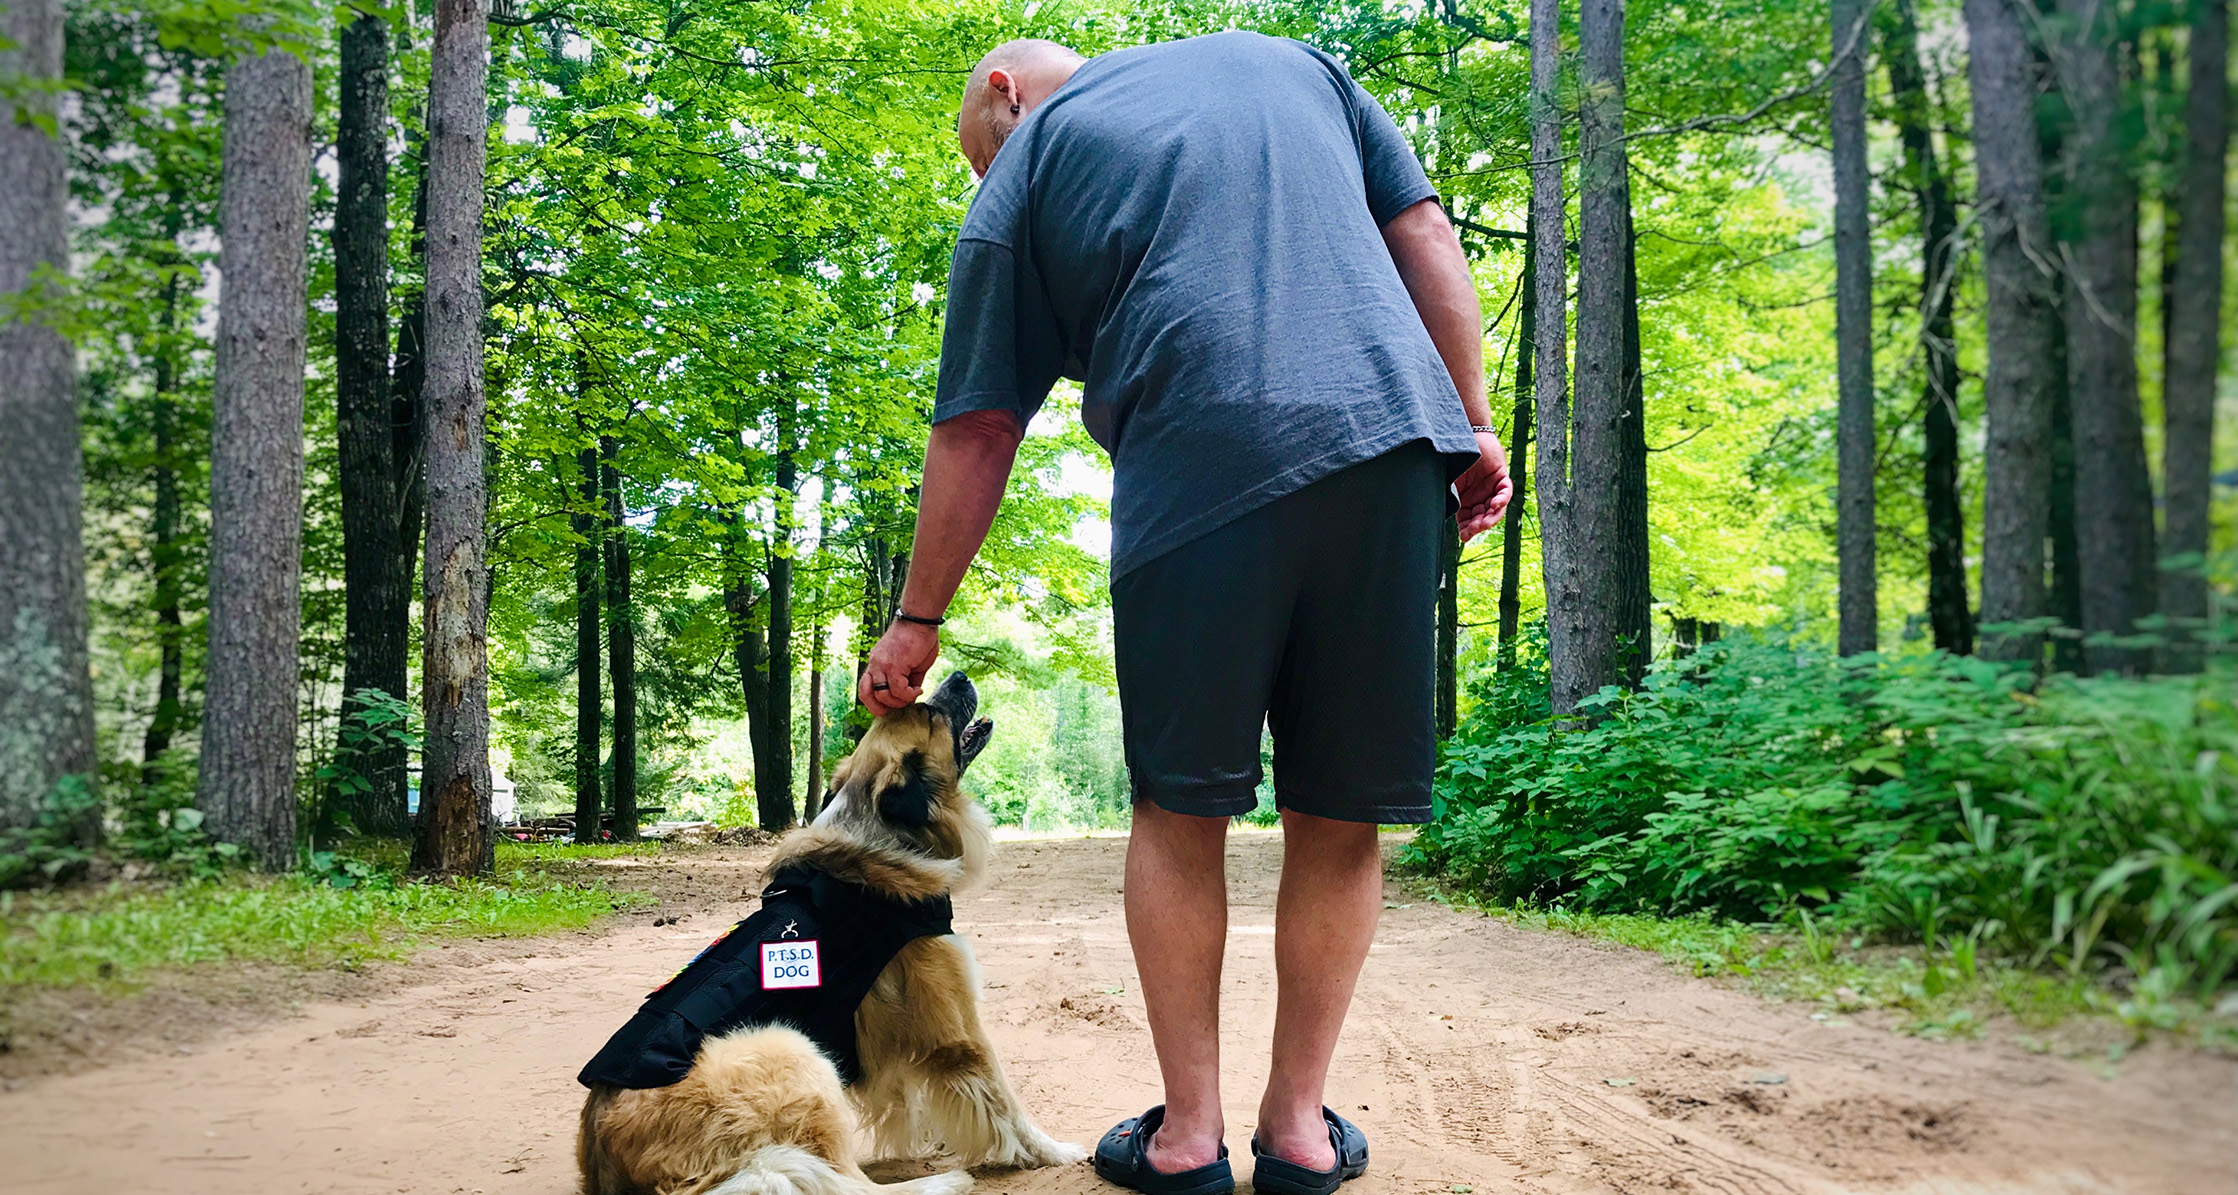 Mental health service dog and owner with PTSD working outdoors.